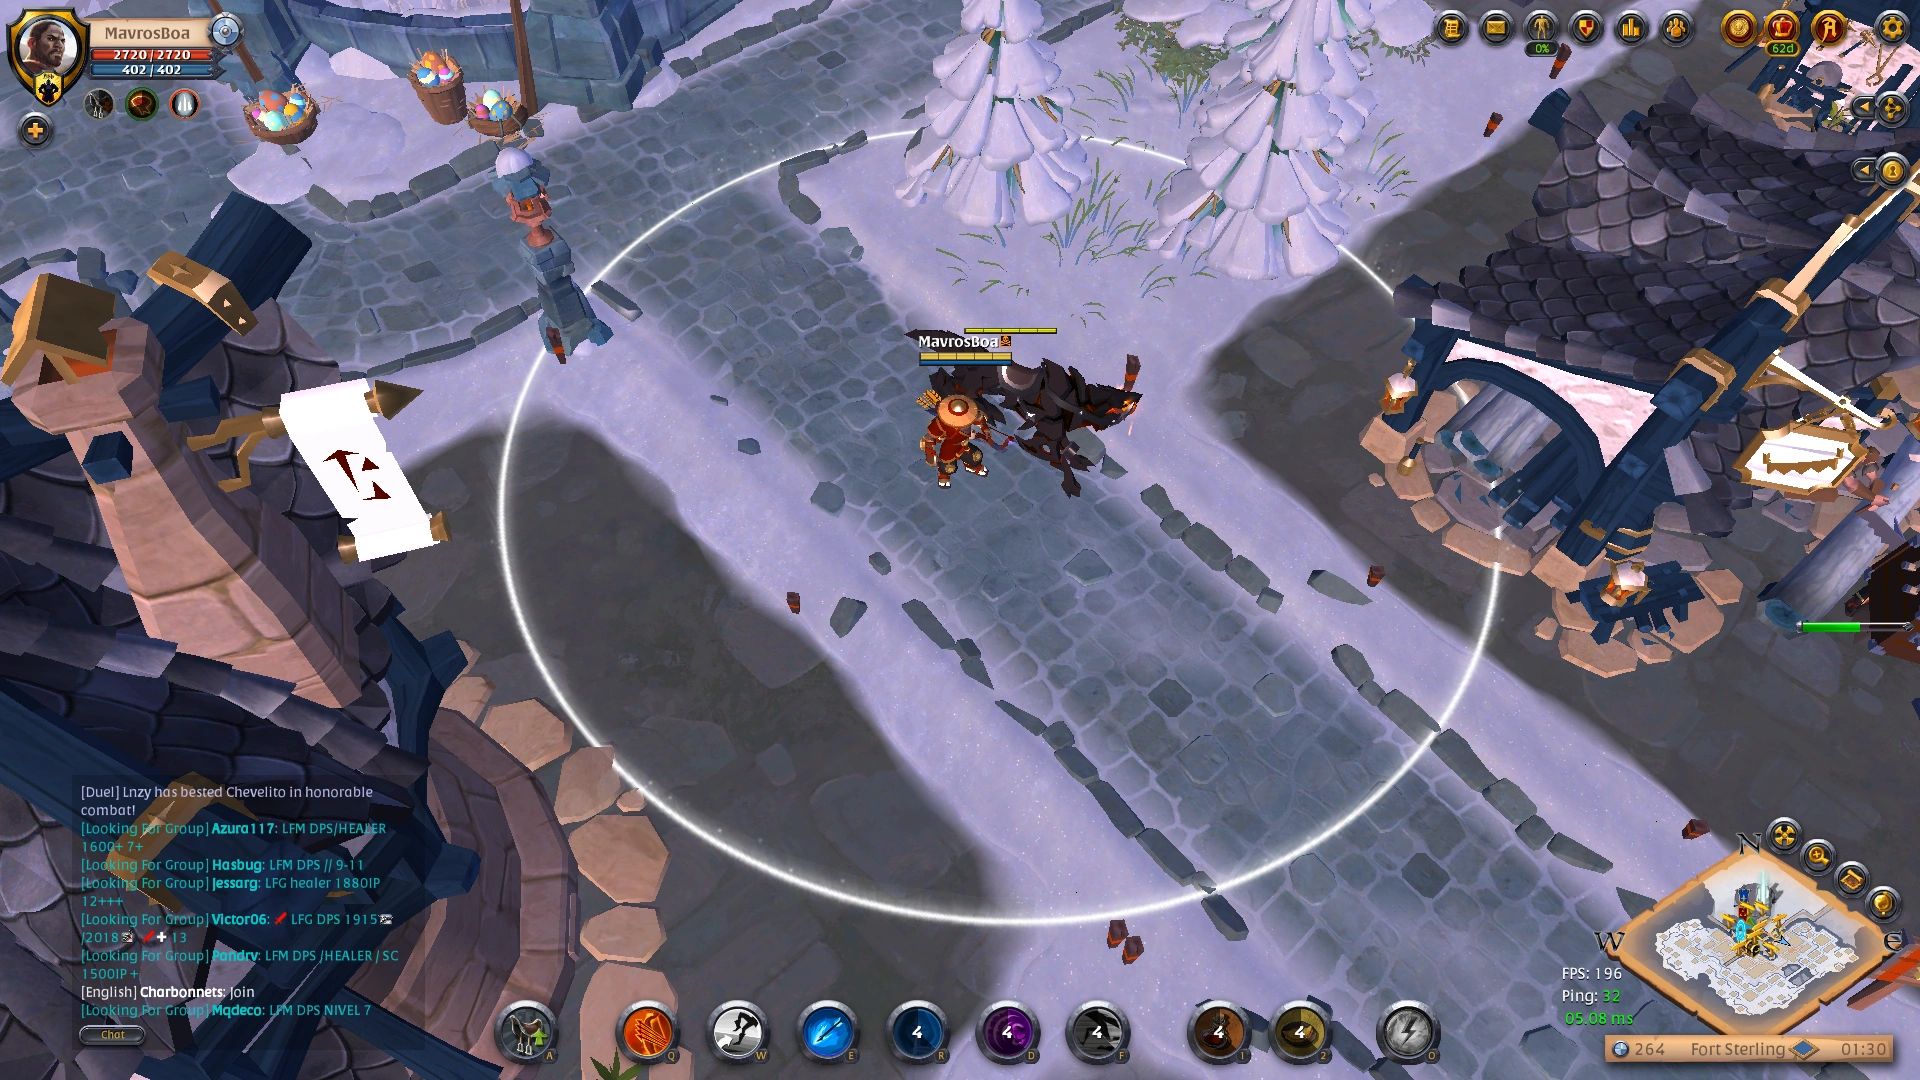 Albion Online – Apps no Google Play